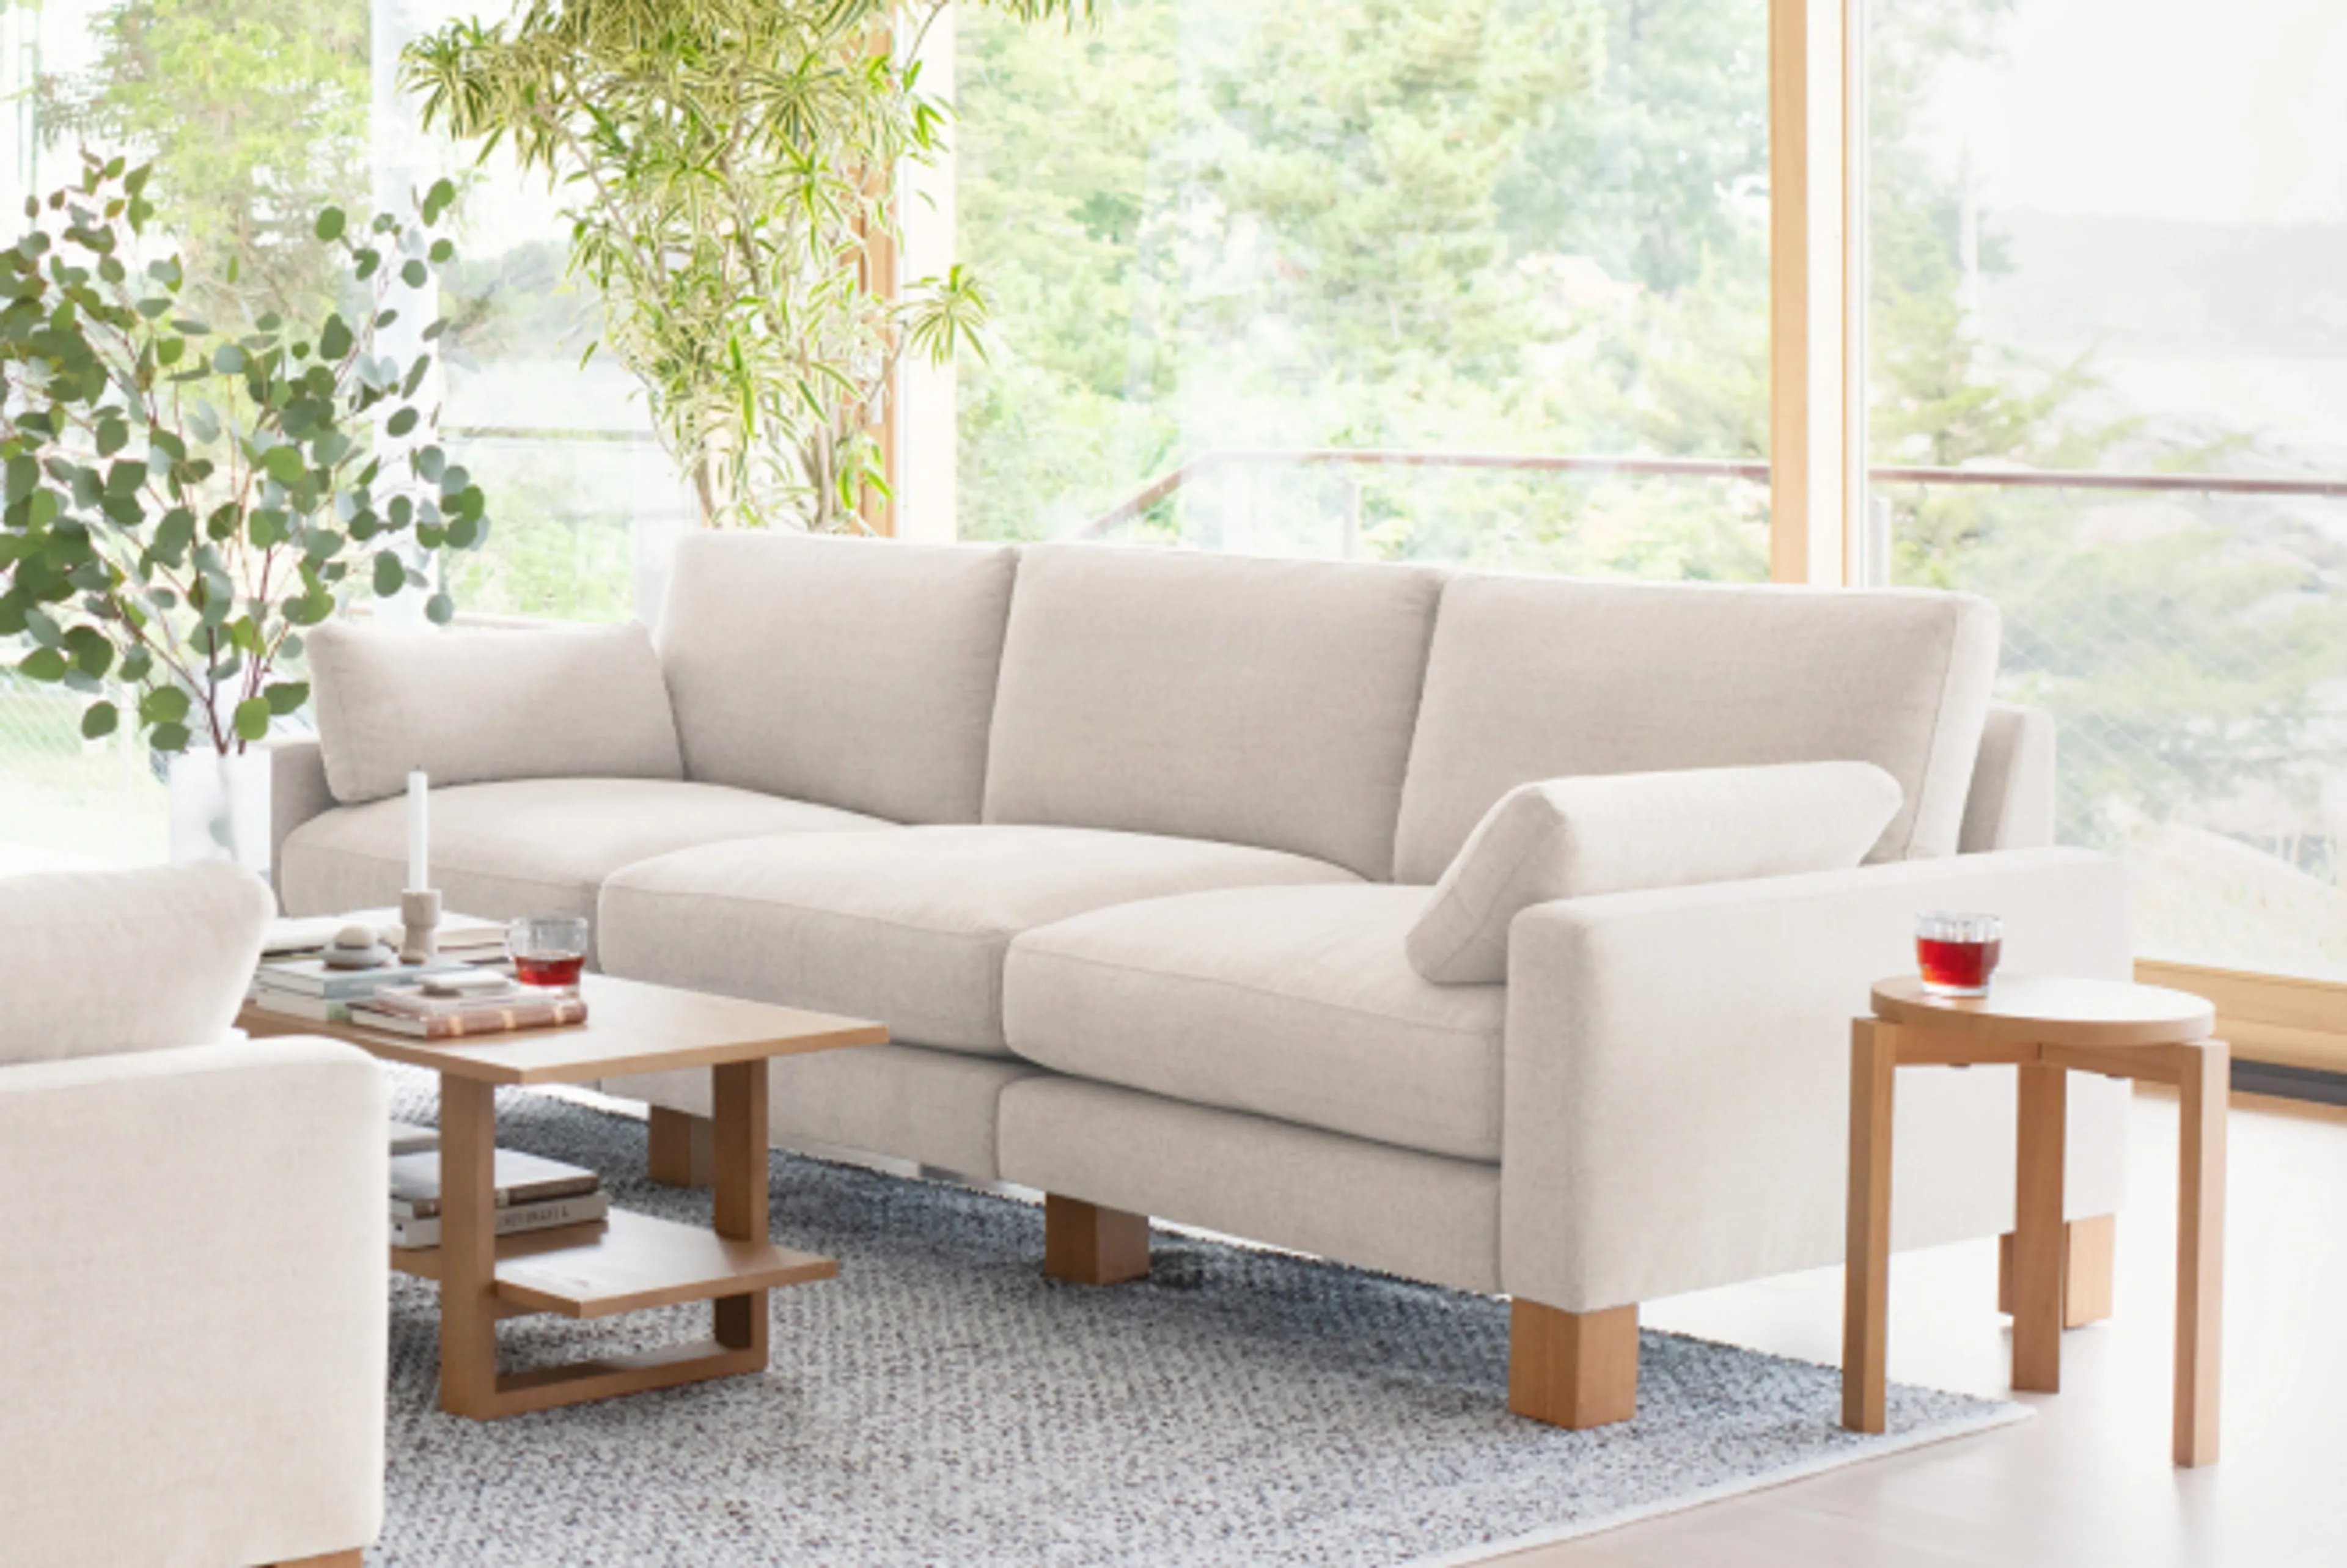 Union sofa in ivory with index stool and index coffee table in living room setting